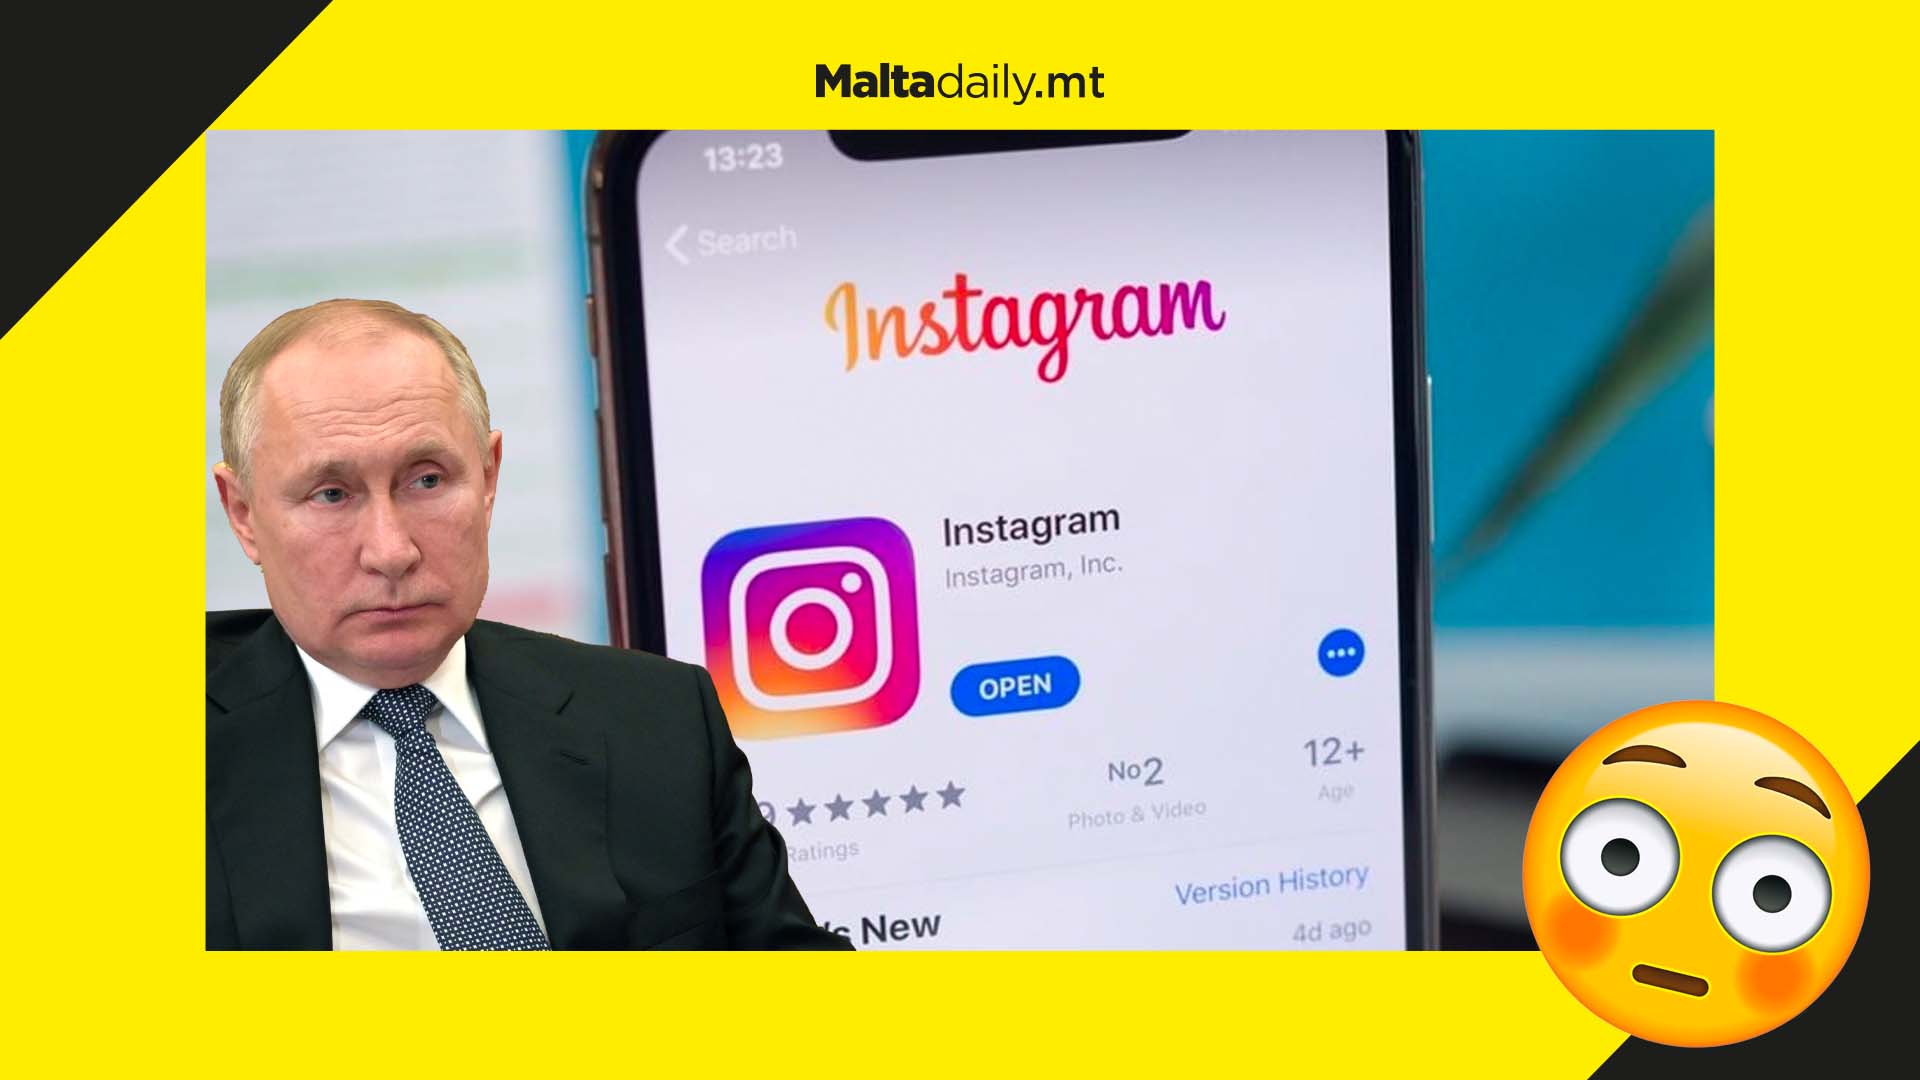 Russia set to launch its version of Instagram after platform ban